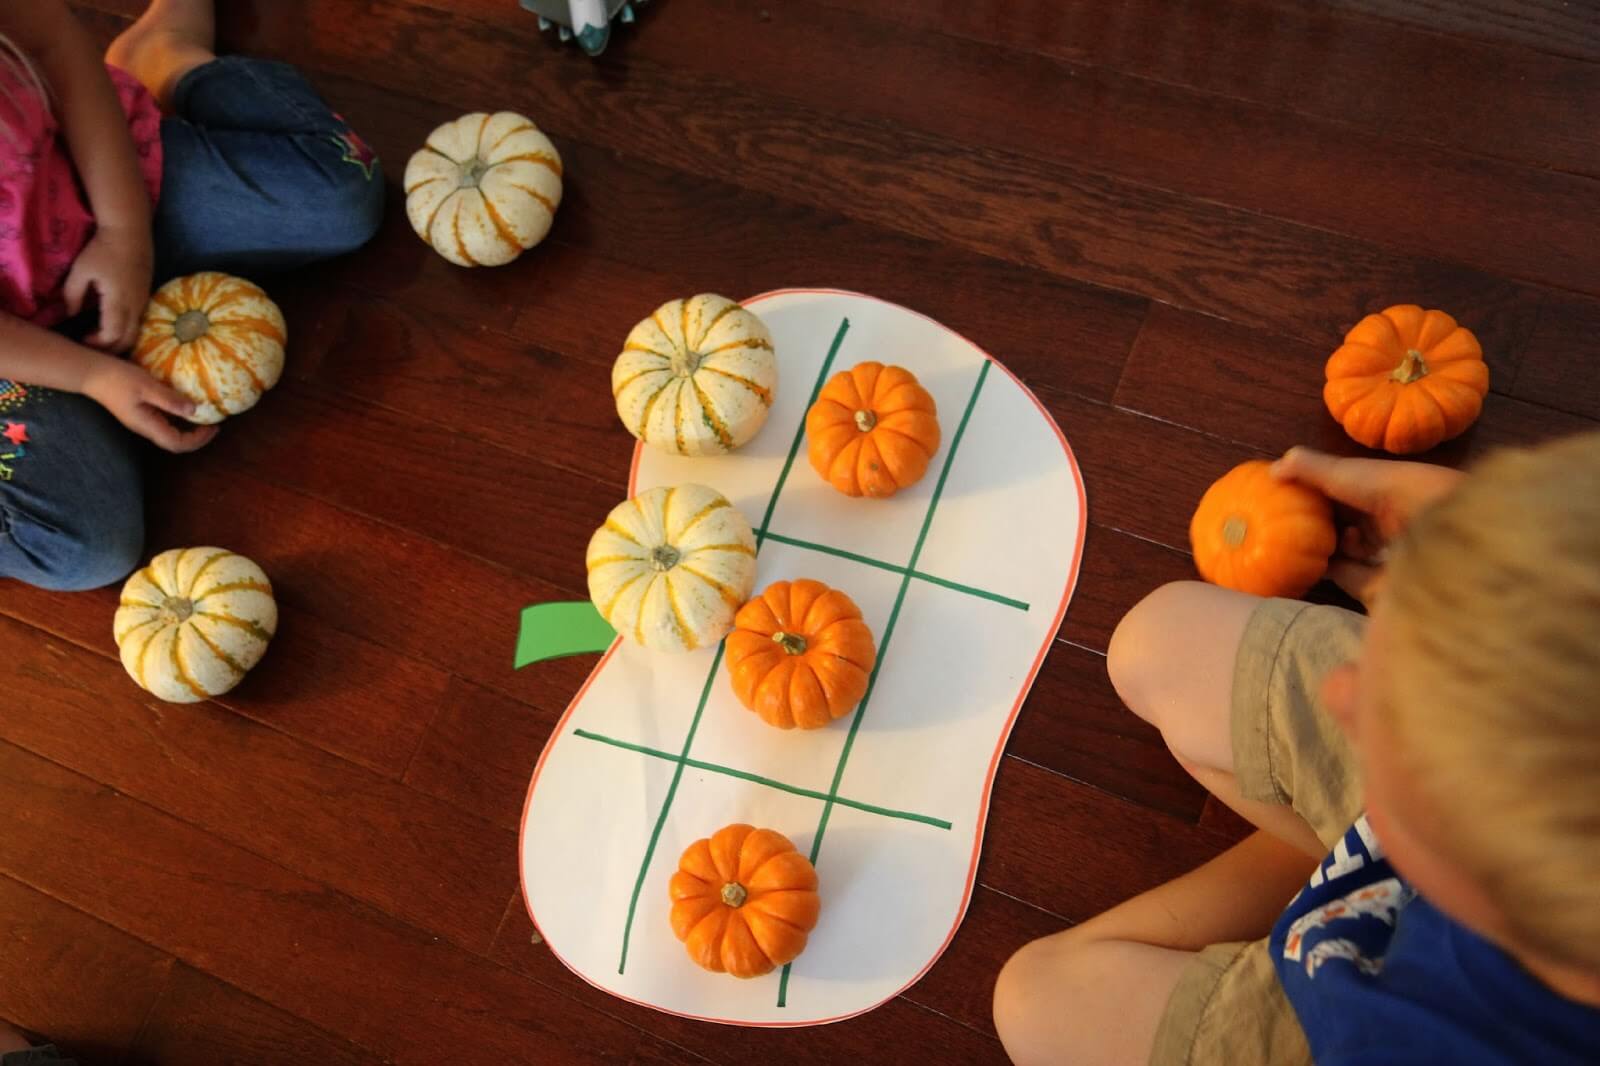 DIY decor that also doubles as entertainment for kids of all ages